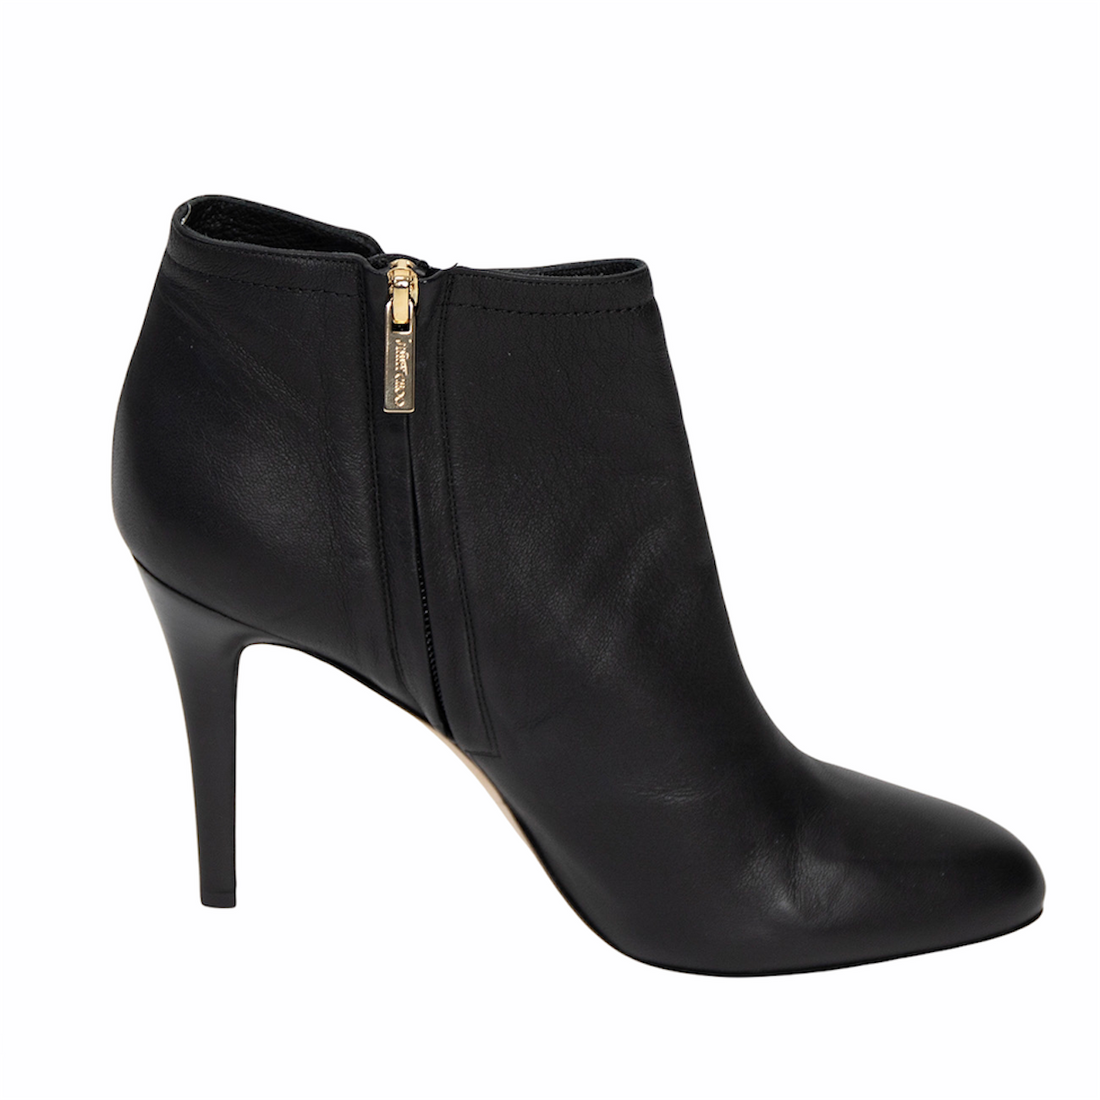 Jimmy Choo zipped ankle boots